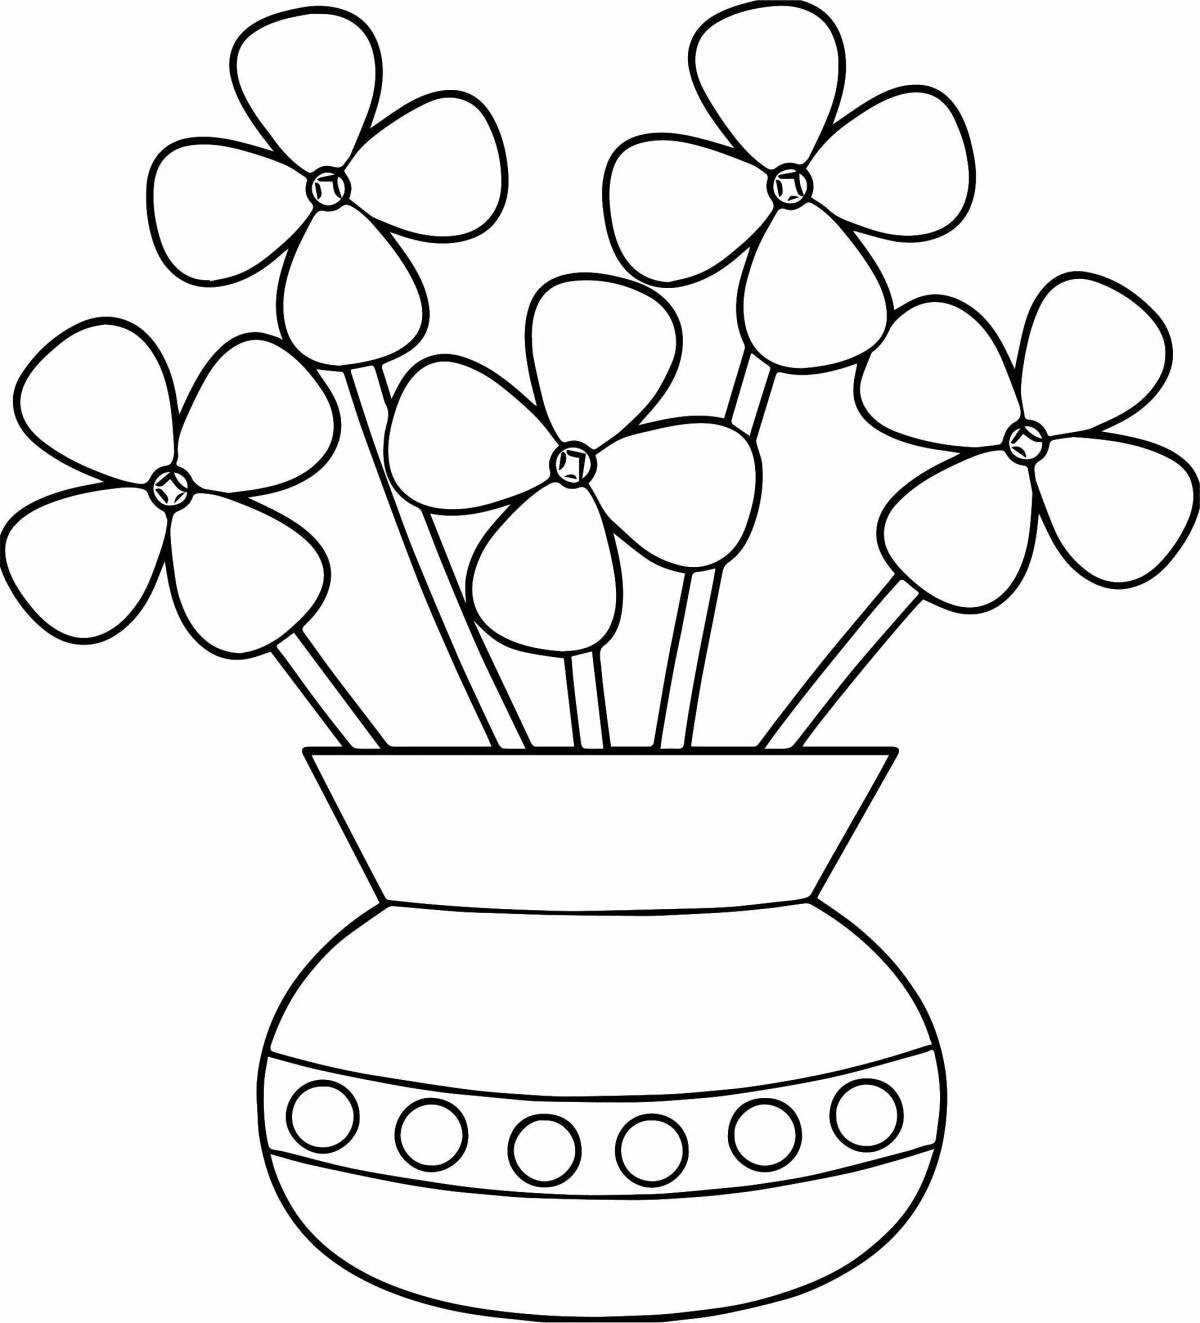 Color explosion how to draw coloring pages